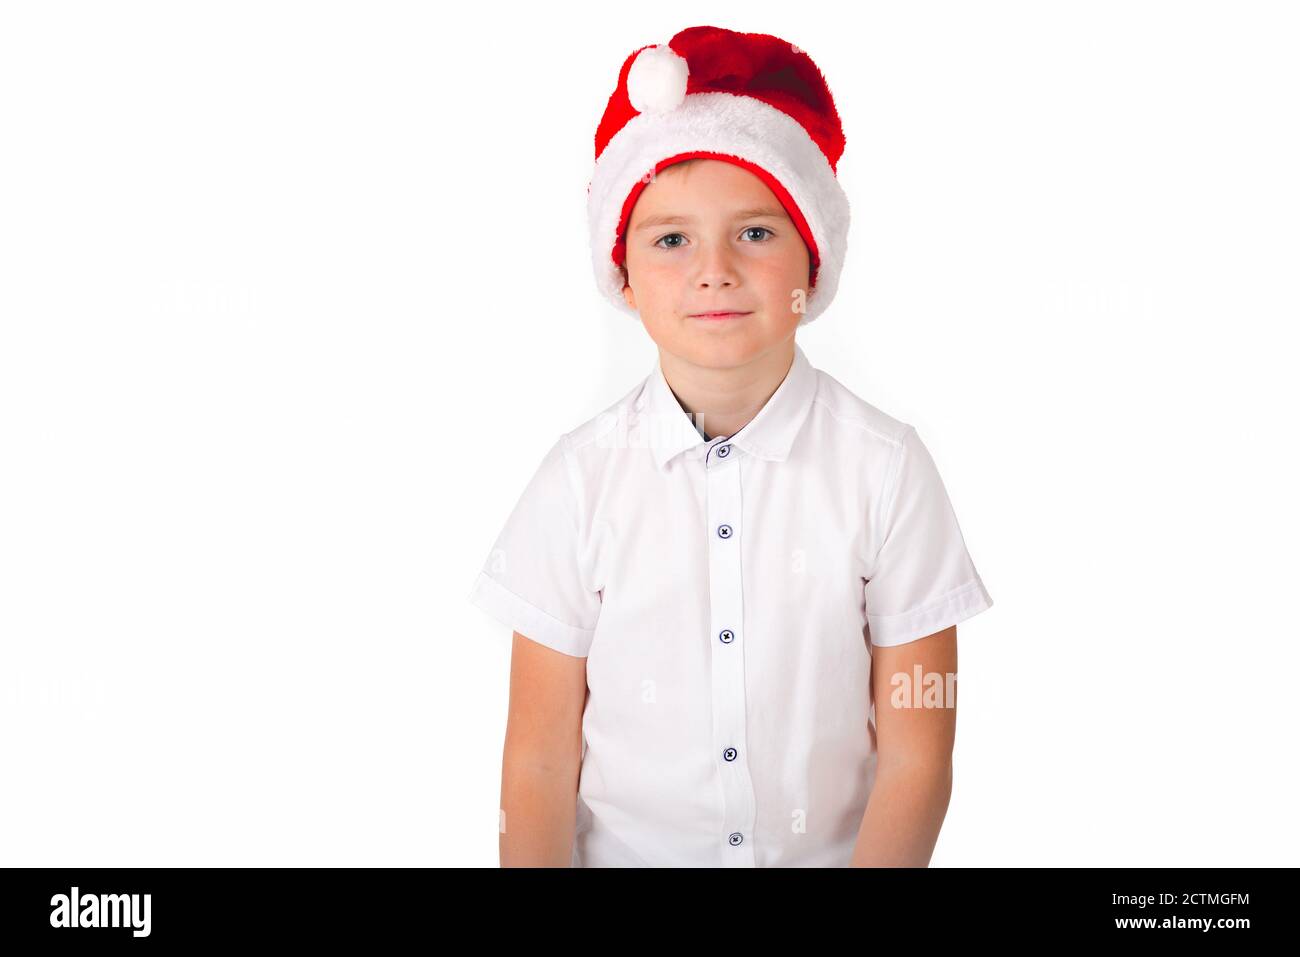 A young caucasian boy showing hand gesture. Kid portrait gesturing with fingers against. Funny emotions, facial expression, body language. Stock Photo